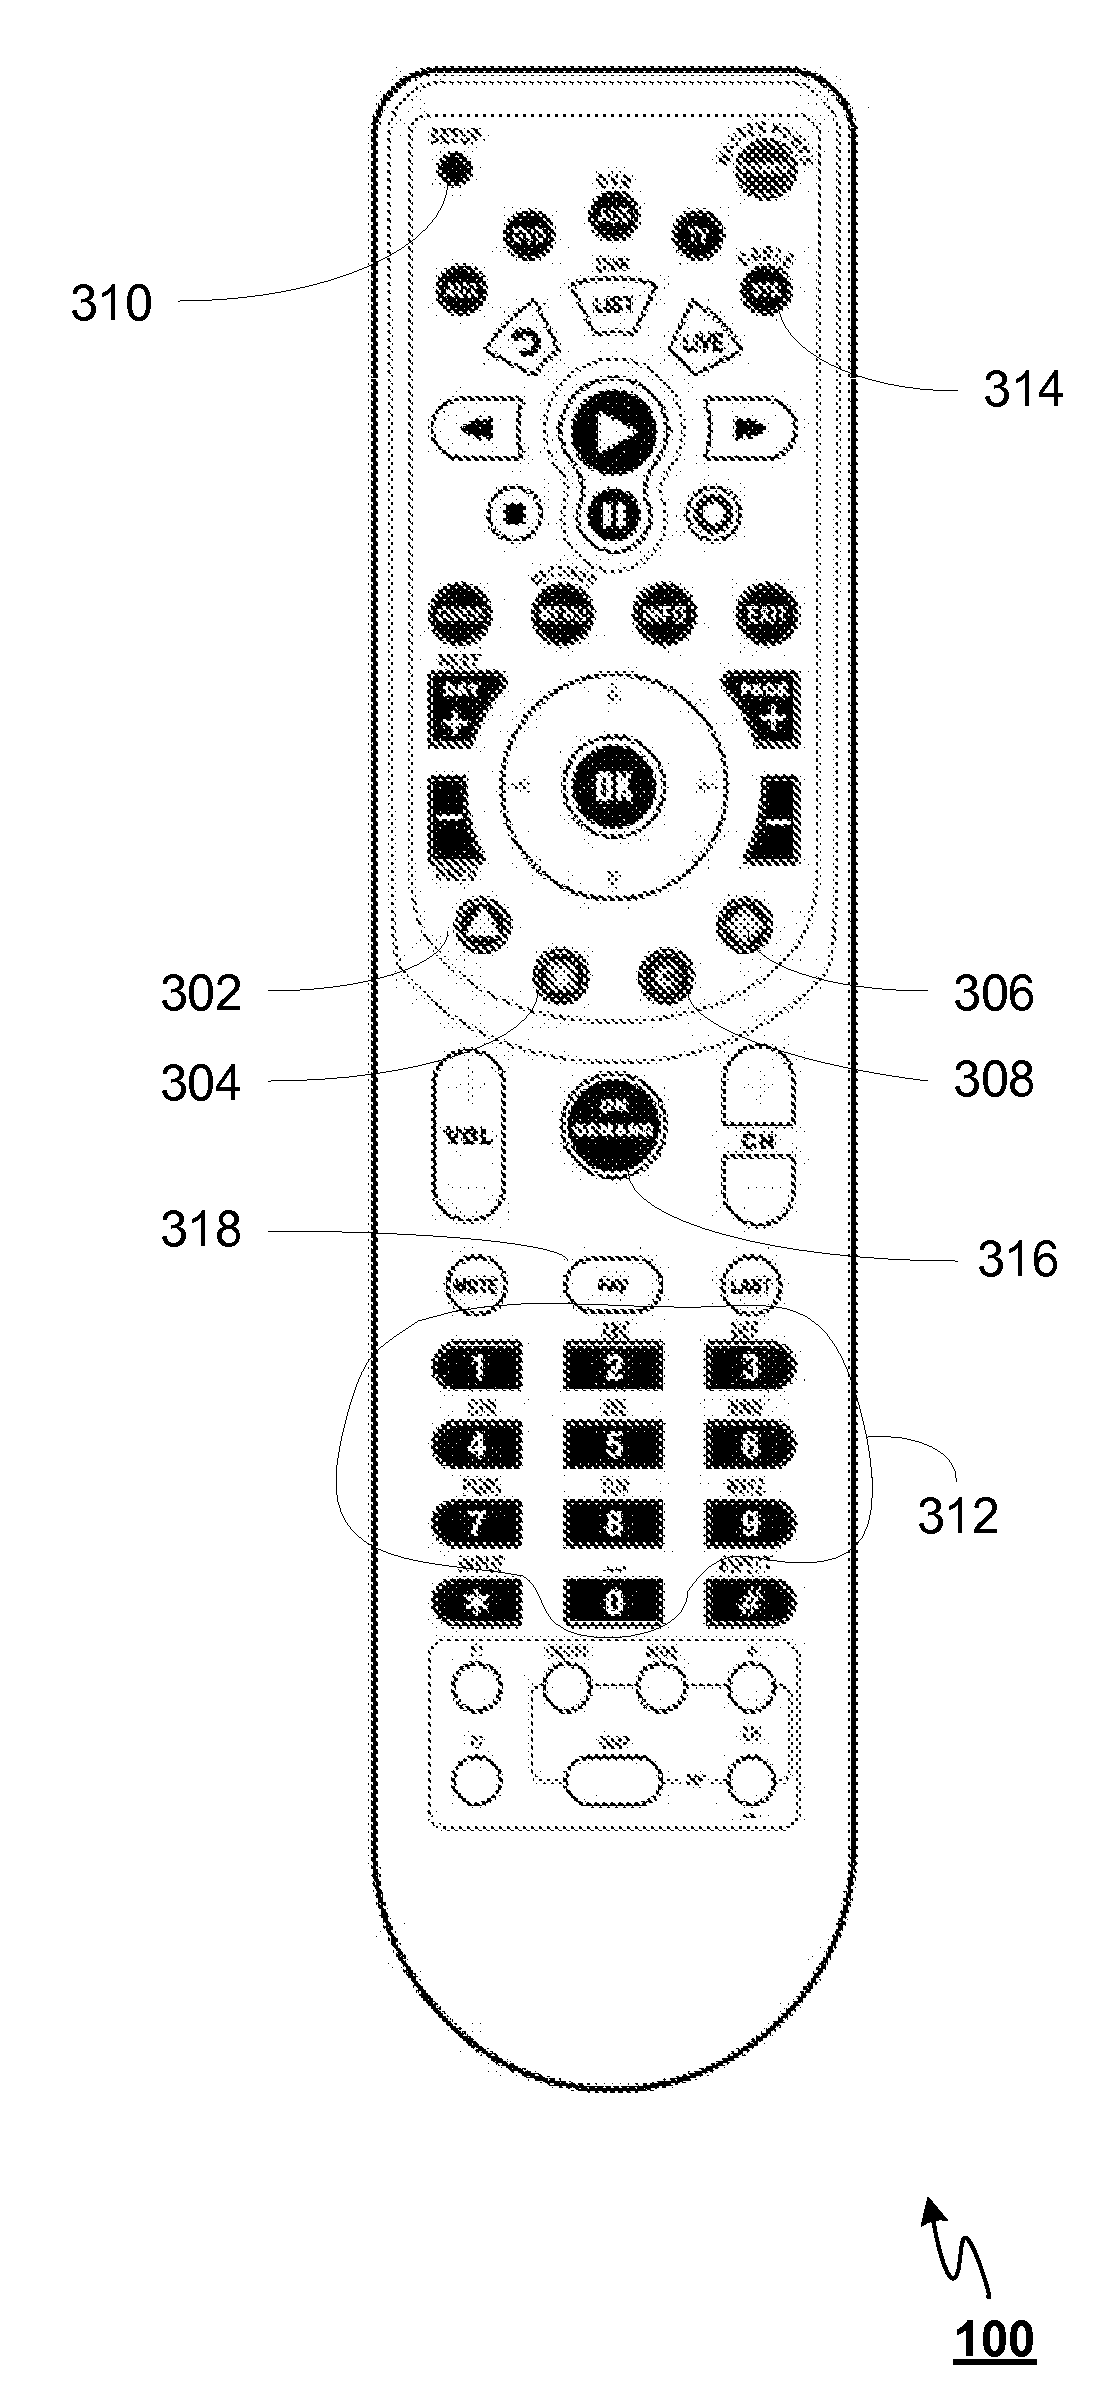 System and method for rapid configuration of a universal controlling device